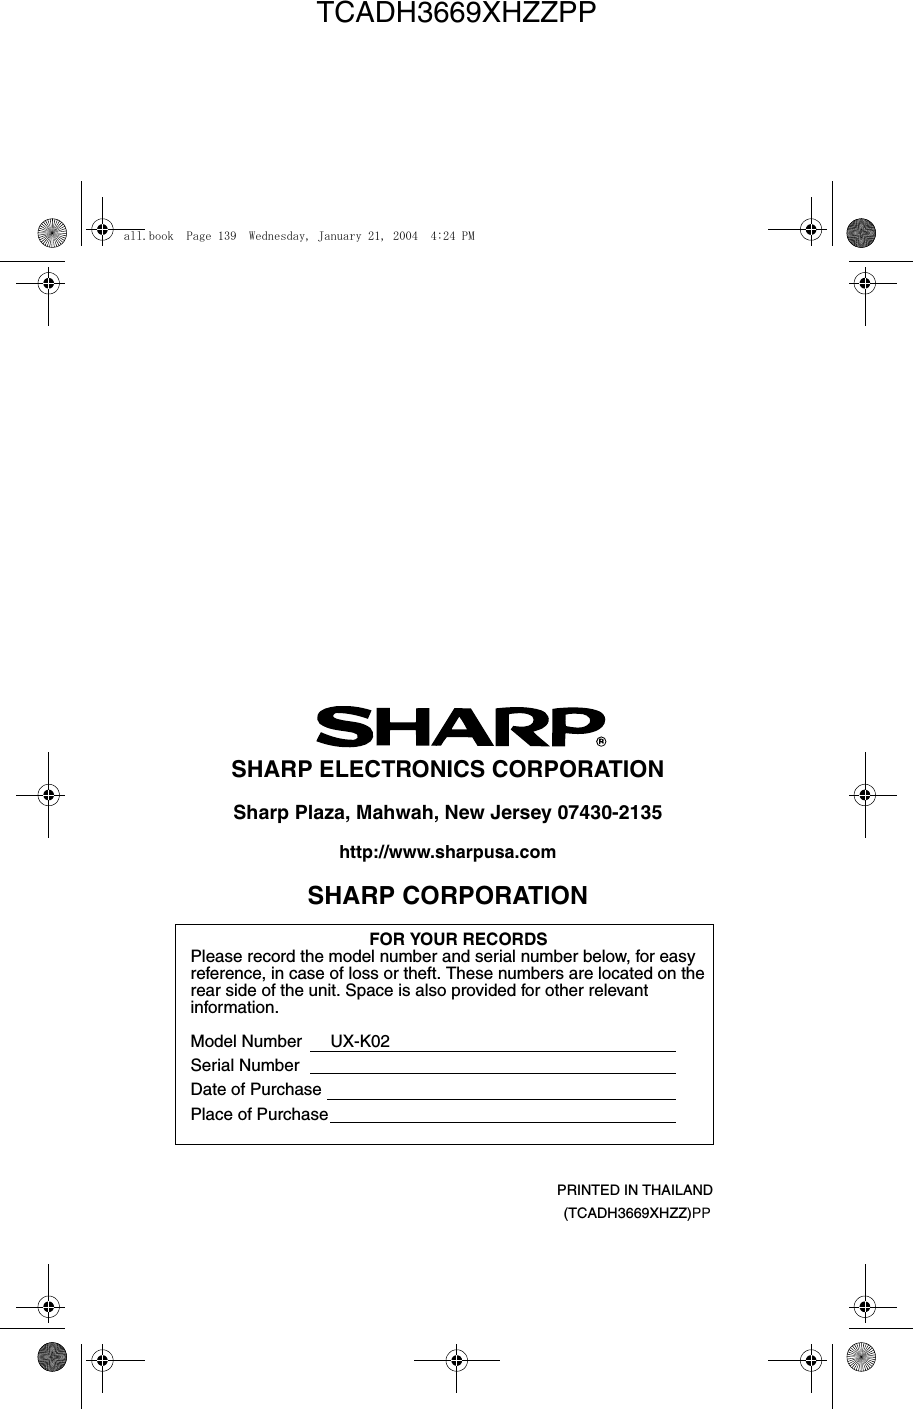 PRINTED IN THAILAND(TCADH3669XHZZ)PPSHARP ELECTRONICS CORPORATIONSharp Plaza, Mahwah, New Jersey 07430-2135http://www.sharpusa.comSHARP CORPORATIONFOR YOUR RECORDSPlease record the model number and serial number below, for easy reference, in case of loss or theft. These numbers are located on the rear side of the unit. Space is also provided for other relevant information.Model Number      UX-K02Serial NumberDate of PurchasePlace of Purchaseall.book  Page 139  Wednesday, January 21, 2004  4:24 PMTCADH3669XHZZPP